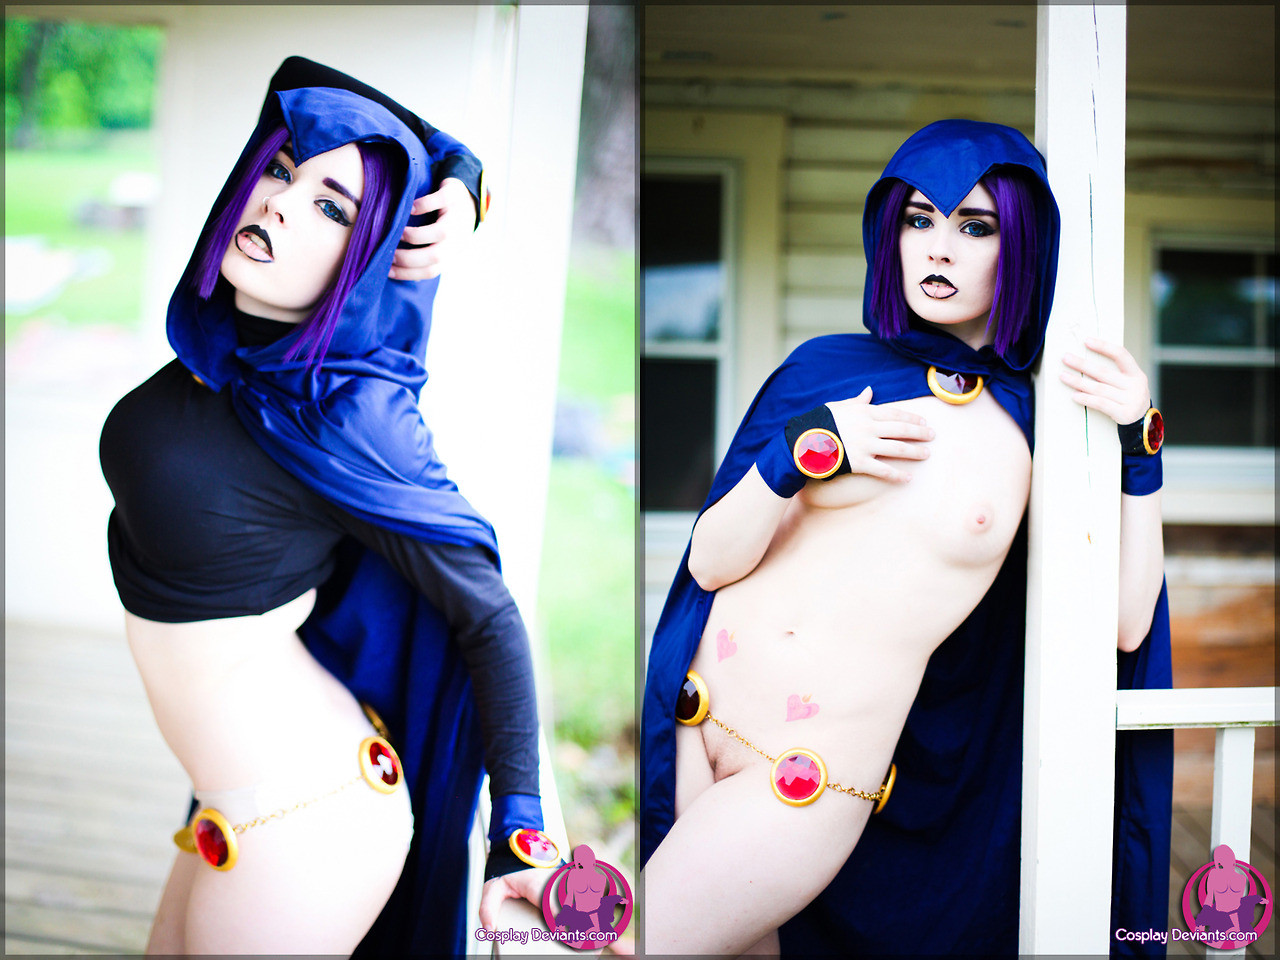 Cosplay raven nude The Best. 